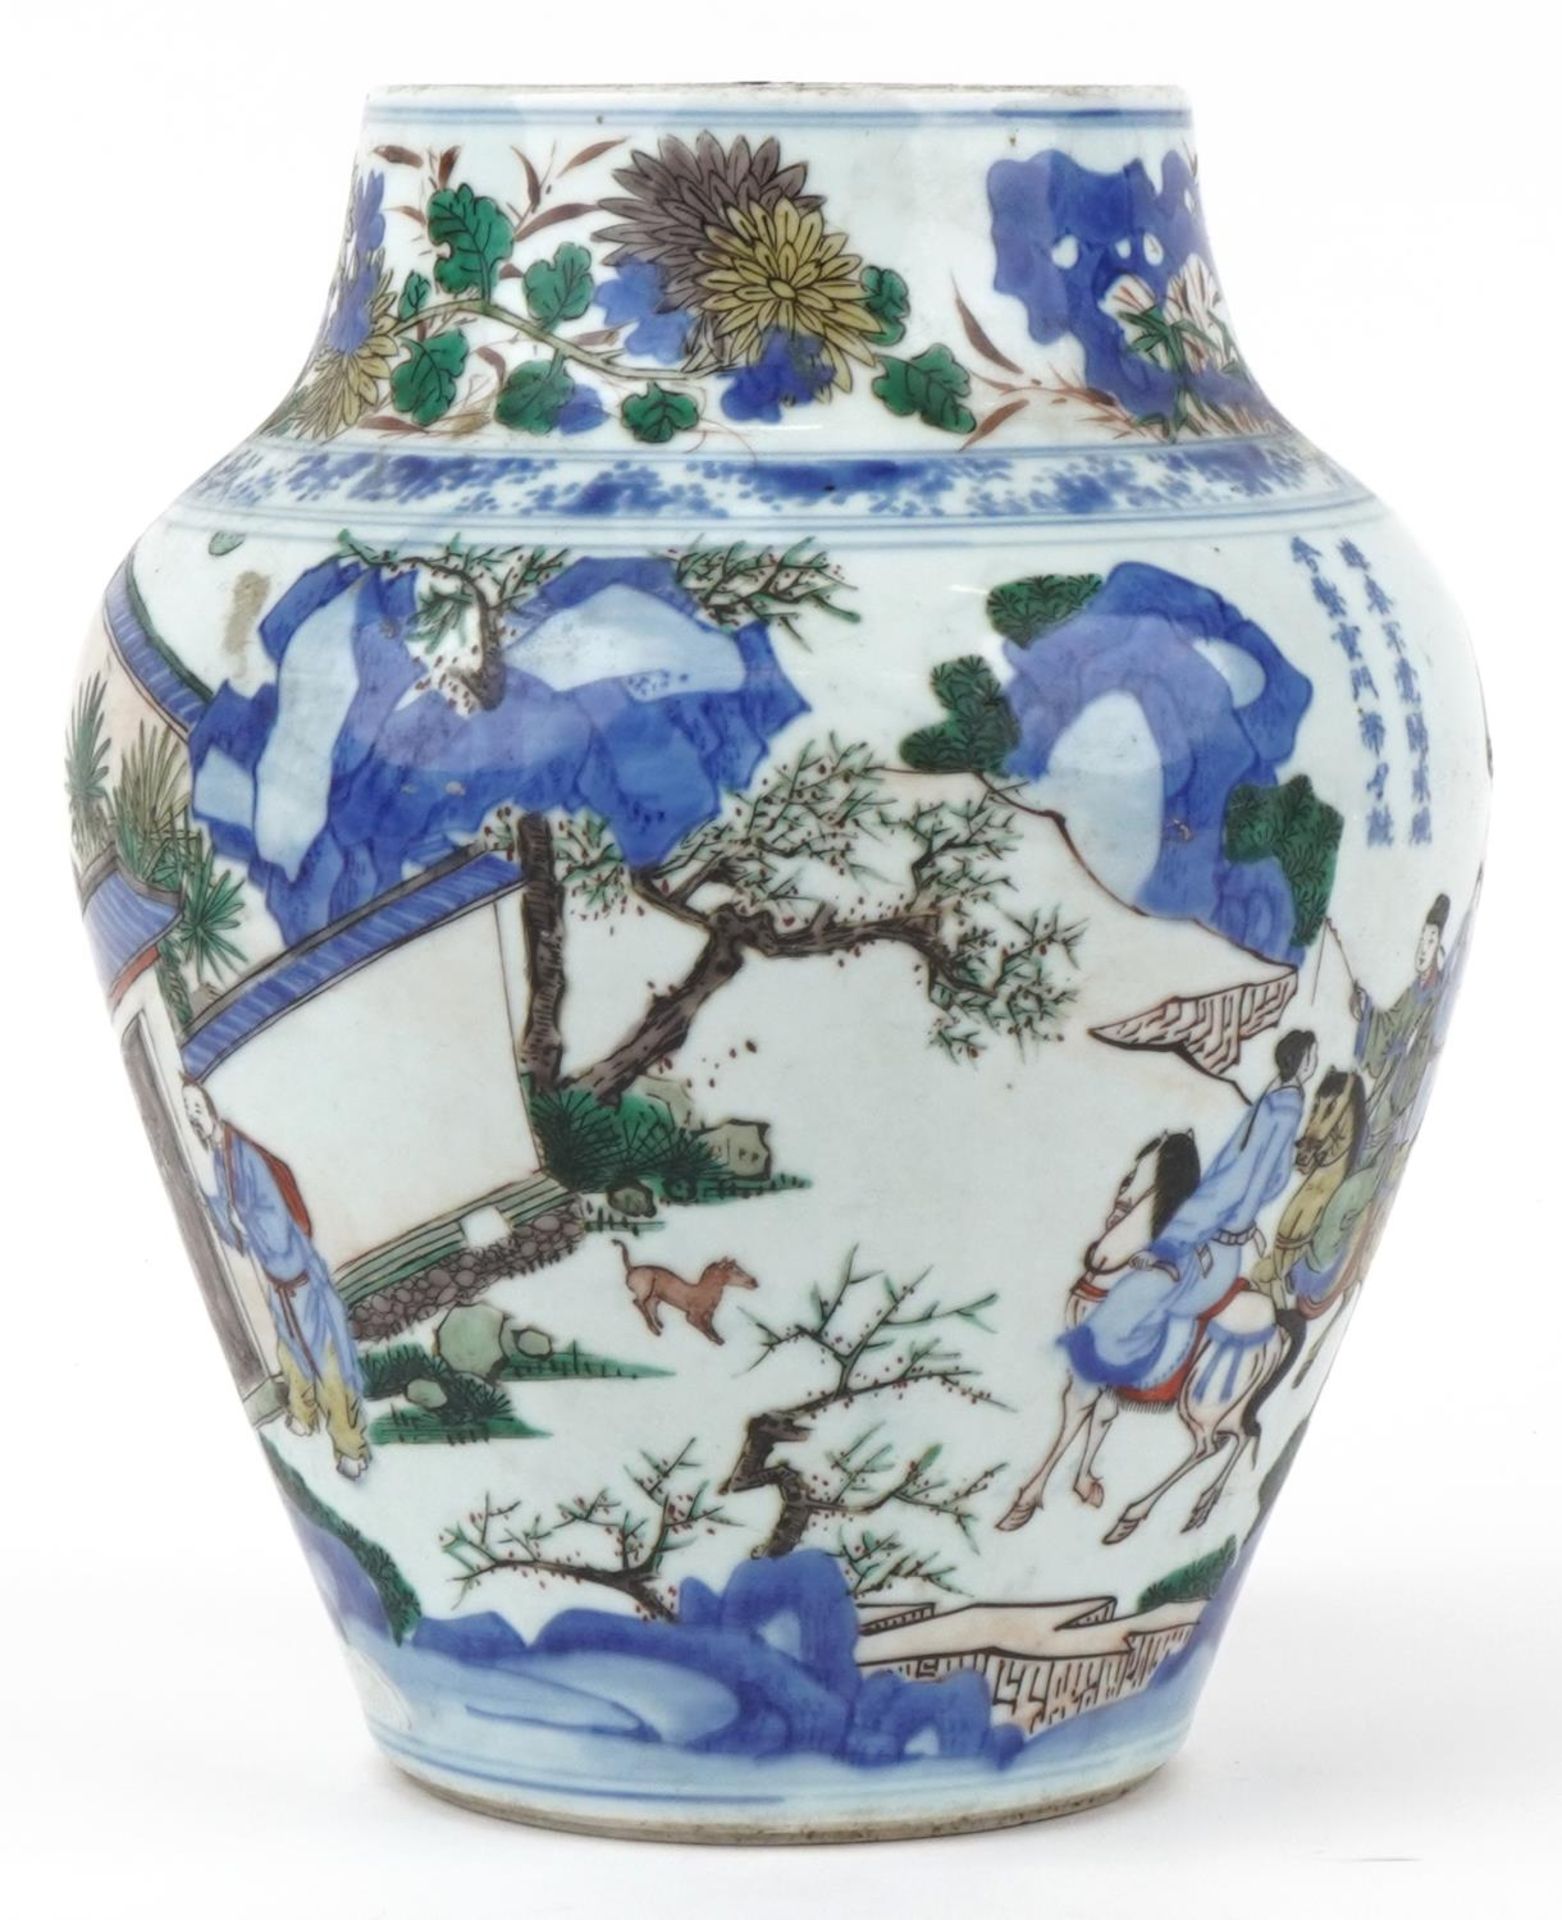 Large Chinese doucai porcelain vase hand painted with a figure on horseback and attendants - Image 2 of 7